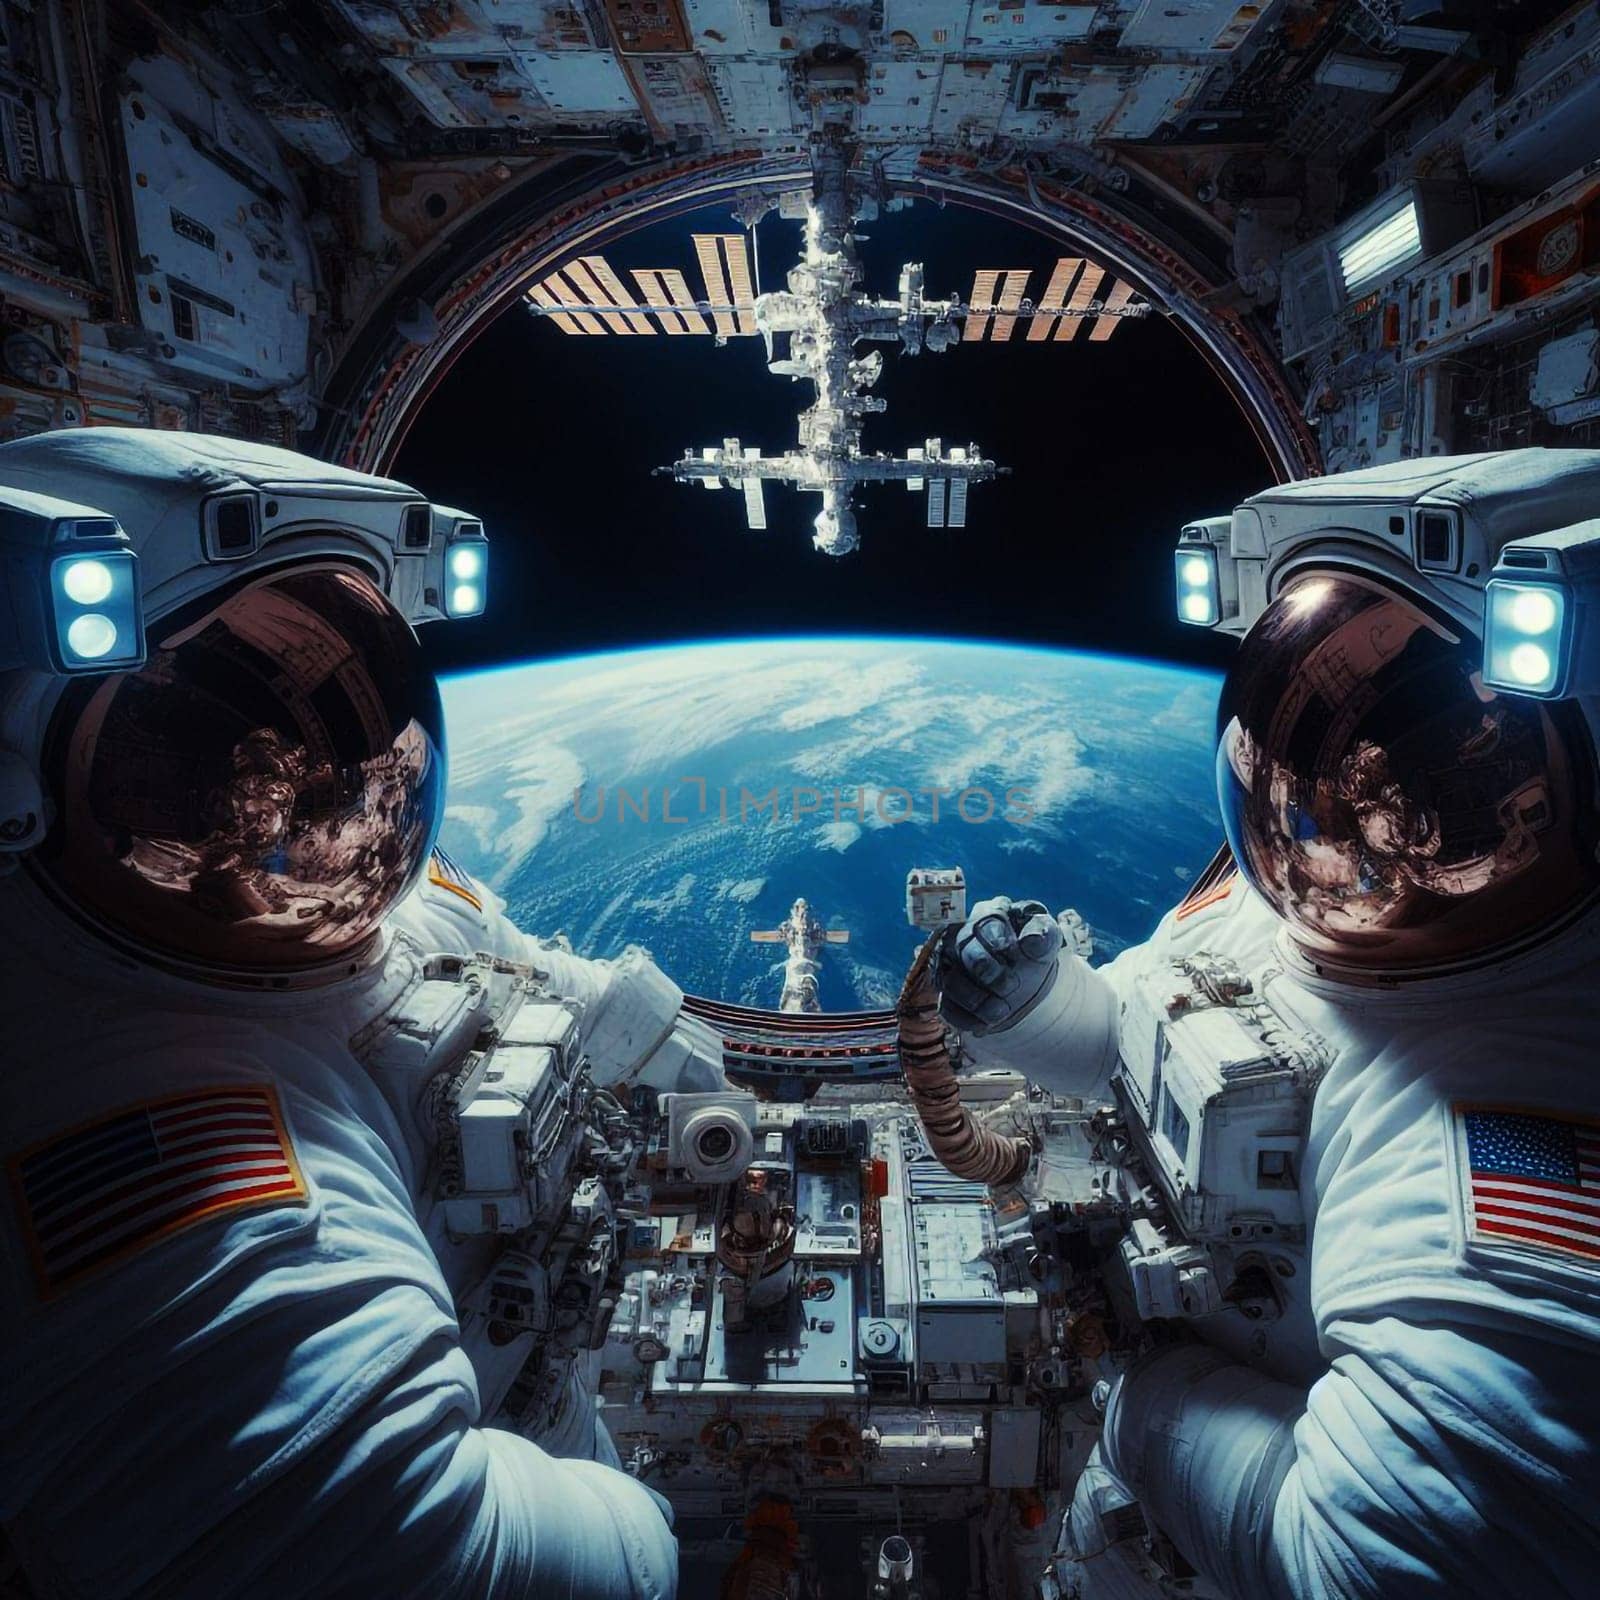 Two astronauts using control panel while orbiting around a planet in a spaceship by sarymsakov